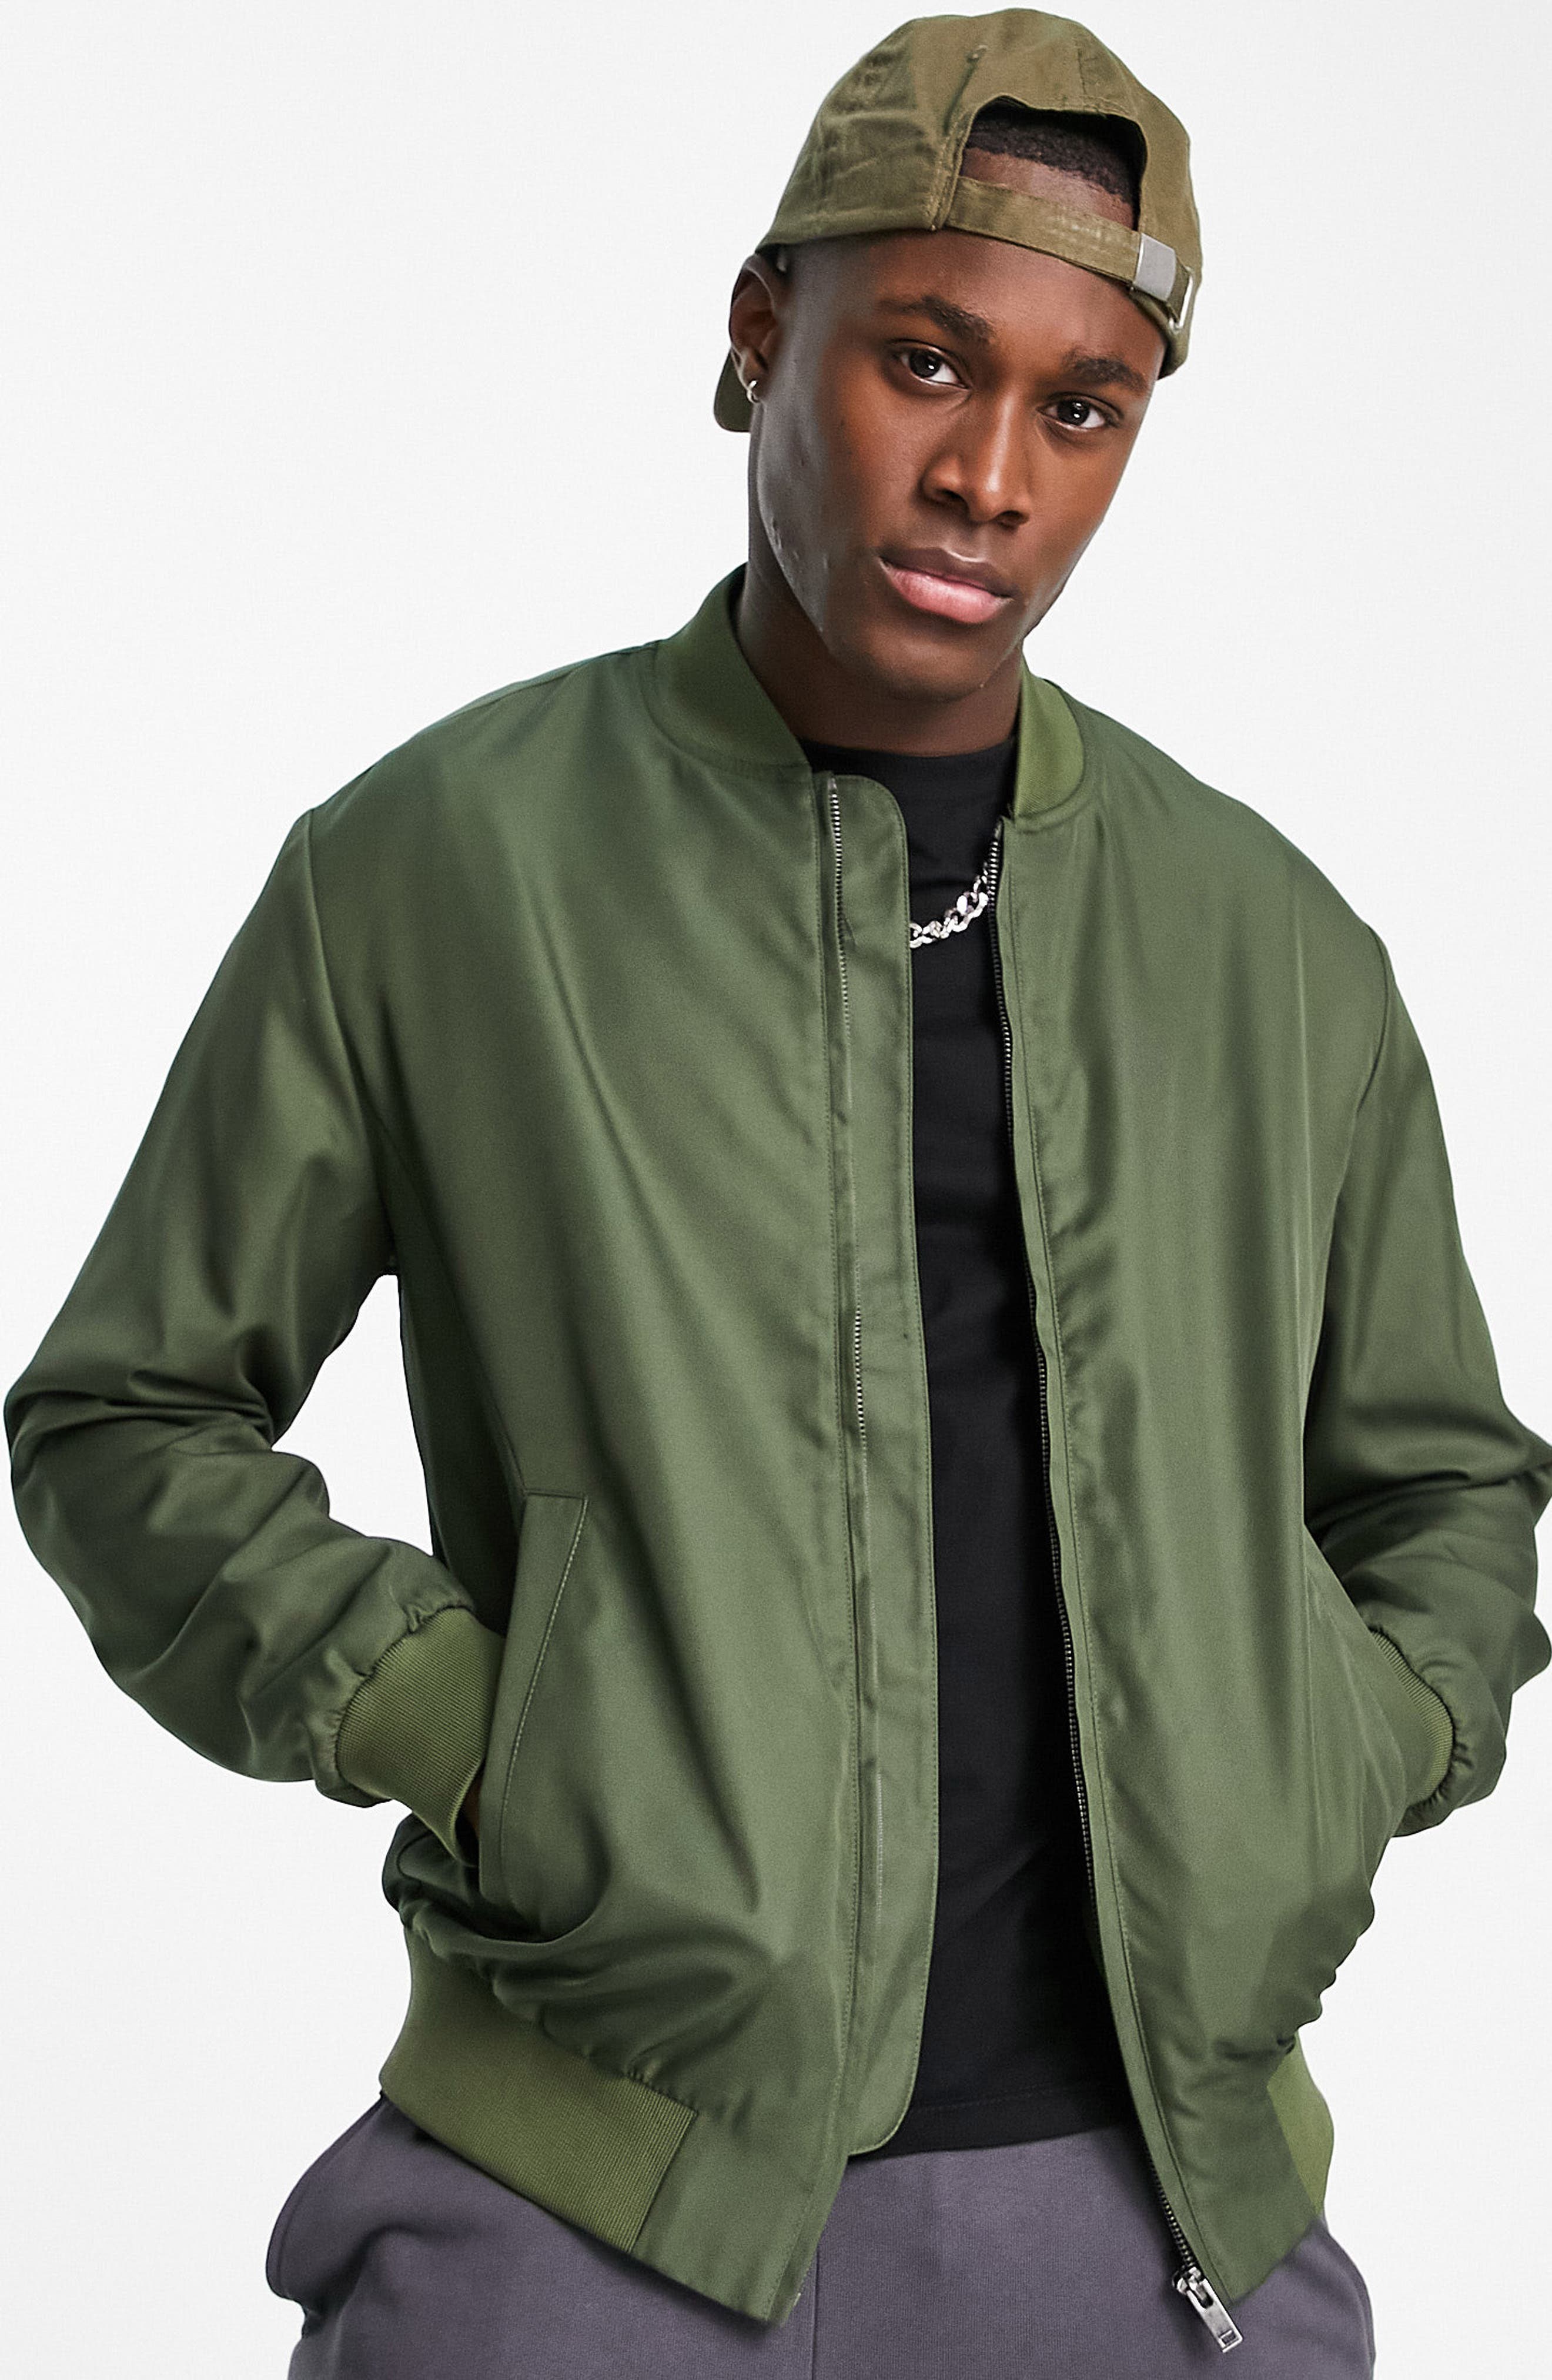 for Men Black DSquared² Synthetic Jacket in Green Mens Jackets DSquared² Jackets 